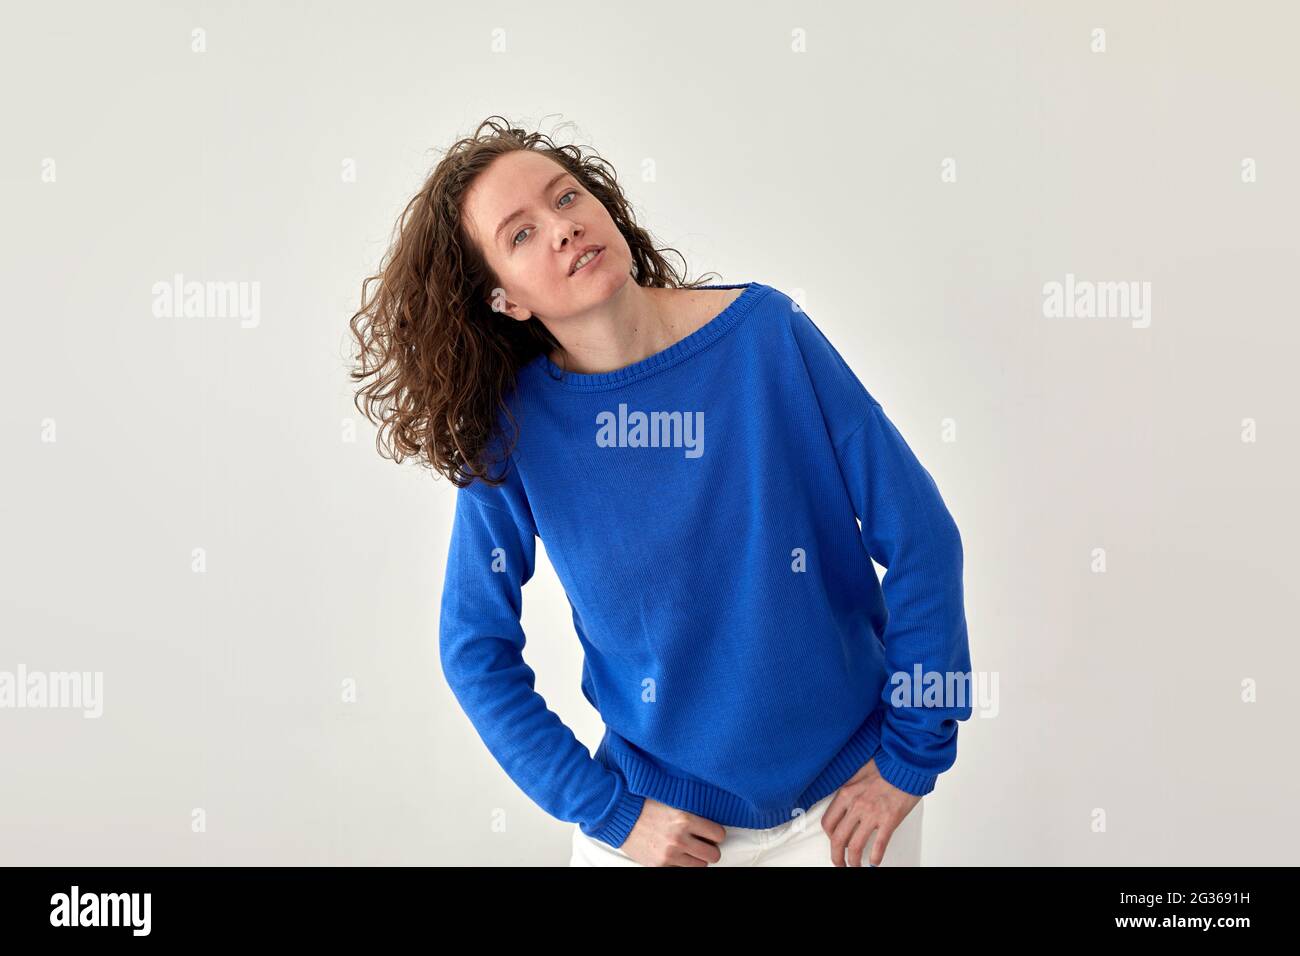 Young female model in trendy oversize blue woolen sweatshirt looking at camera against white background Stock Photo